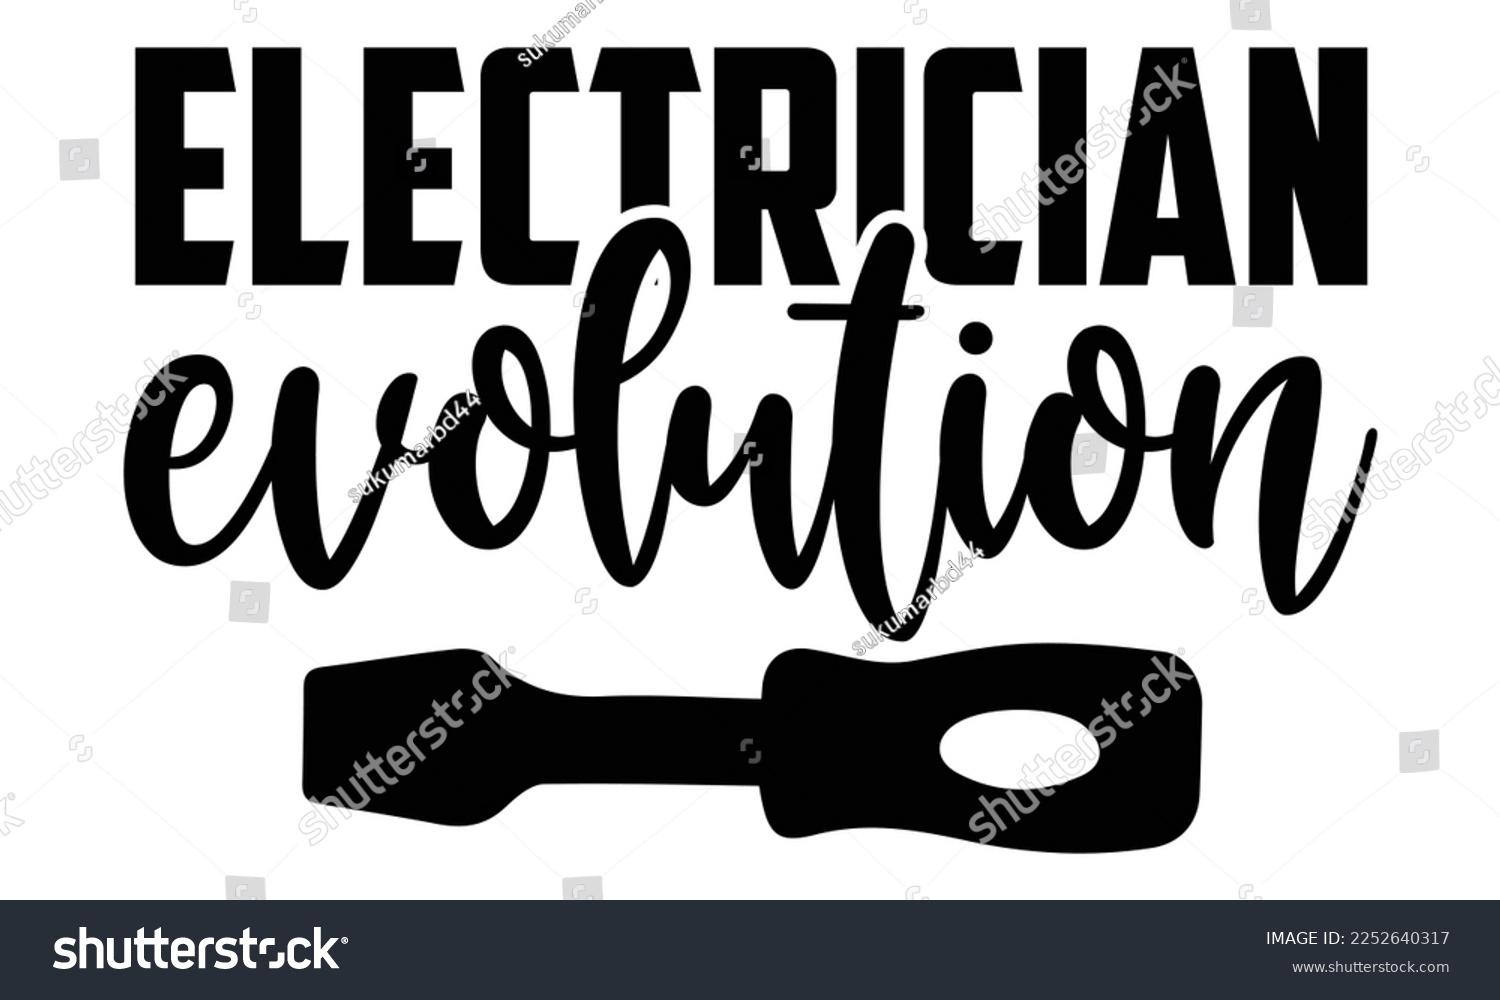 SVG of Electrician Evolution - Electrician Svg Design, Calligraphy graphic design, Hand written vector svg design, t-shirts, bags, posters, cards, for Cutting Machine, Silhouette Cameo, Cricut svg